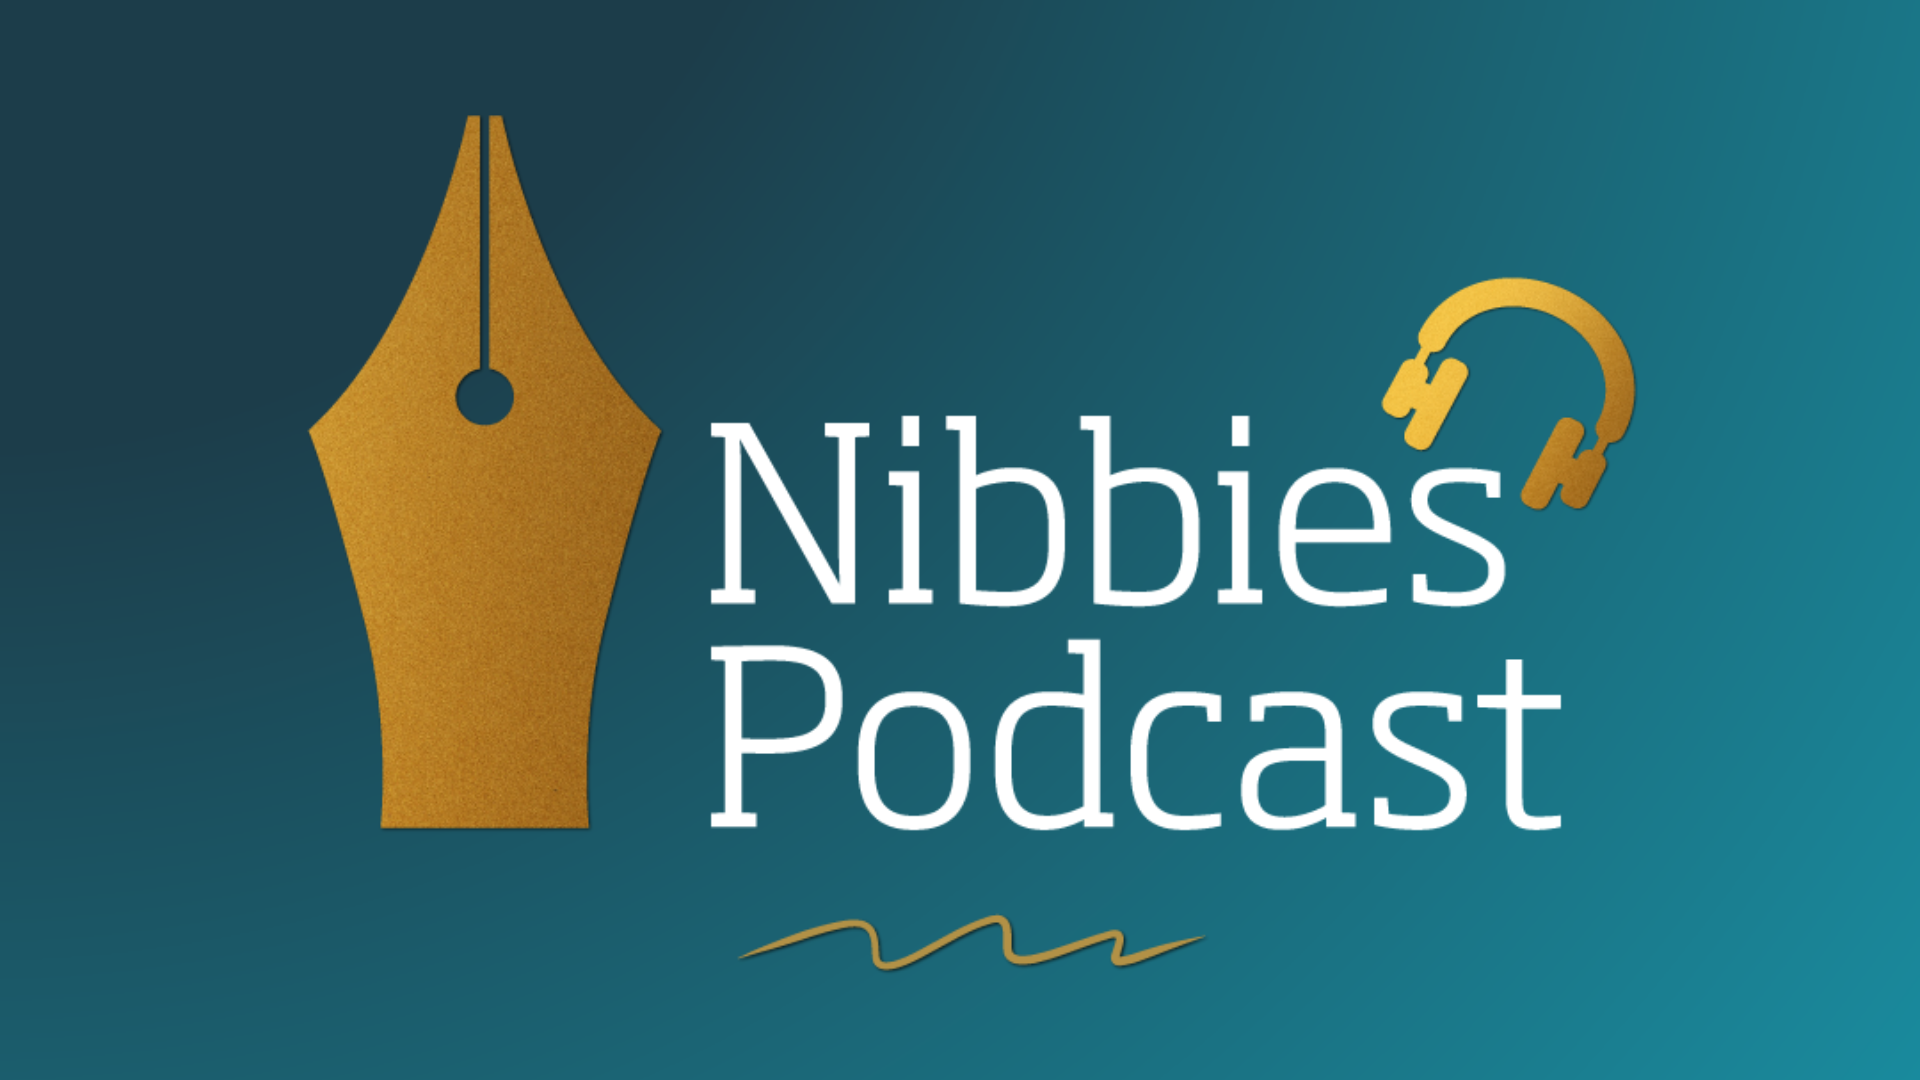 Nibbies podcast launches with Steadman and Sanghera